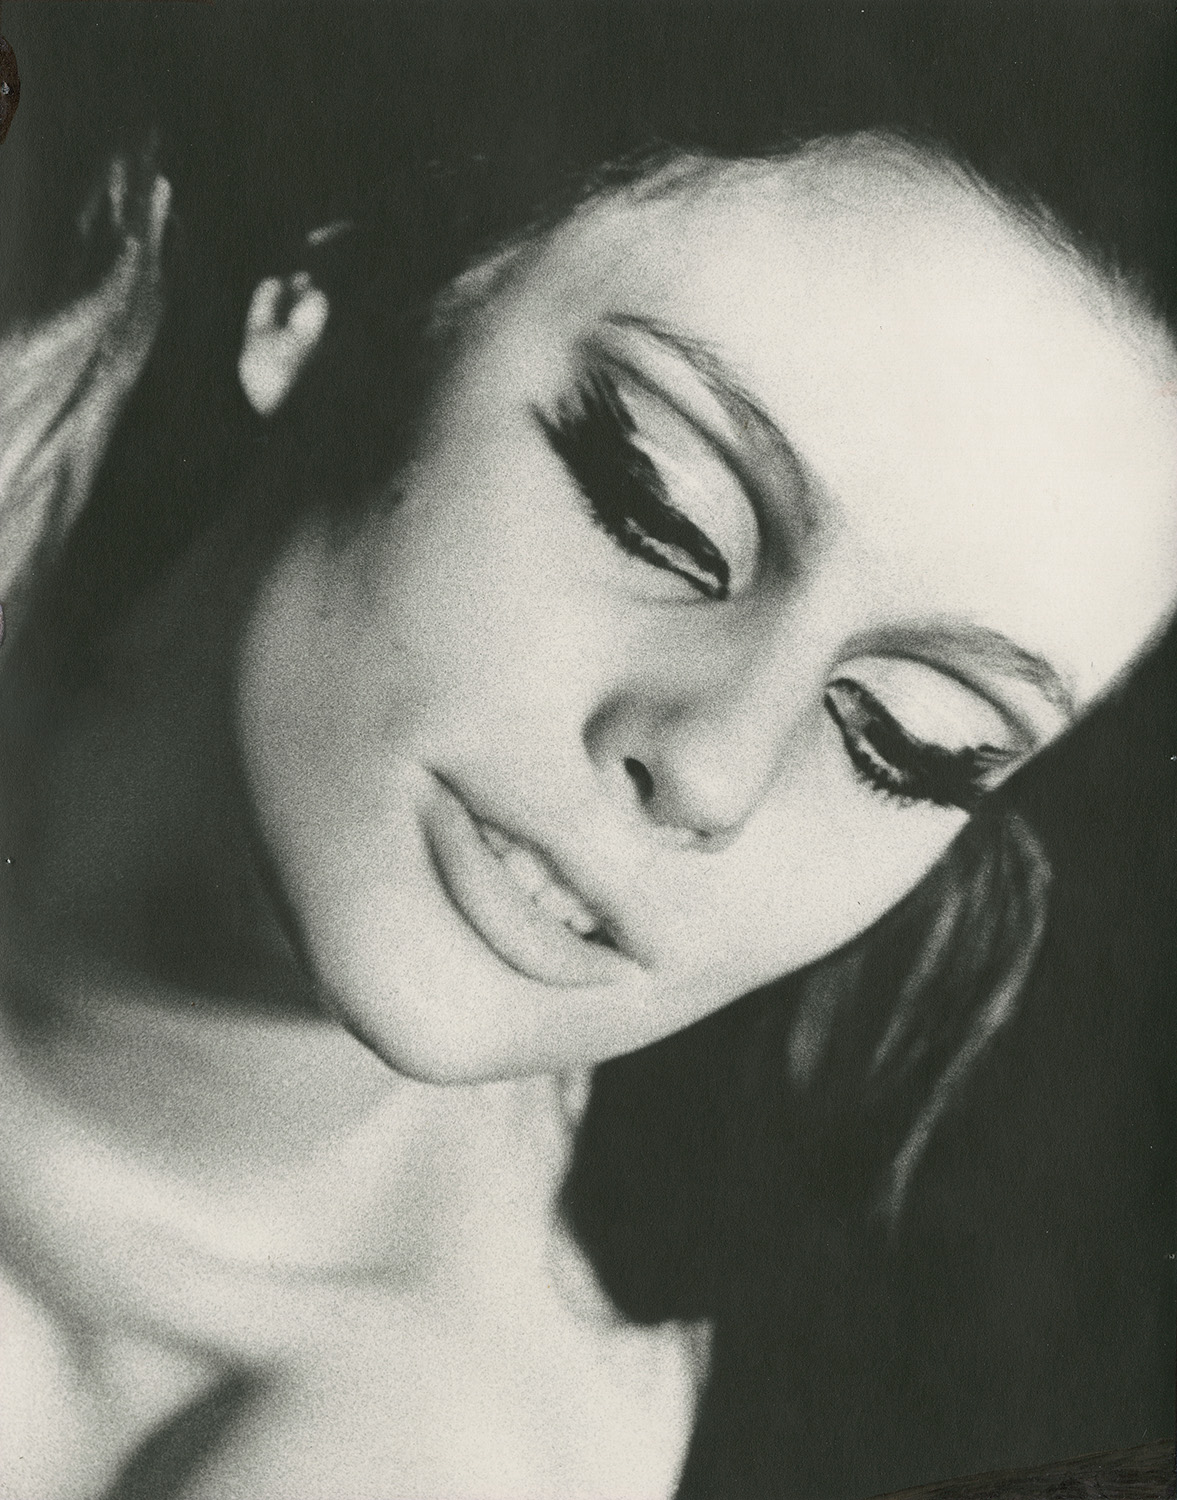 International Velvet (Susan Bottomly) was a Warhol Superstar in the late 1960s.